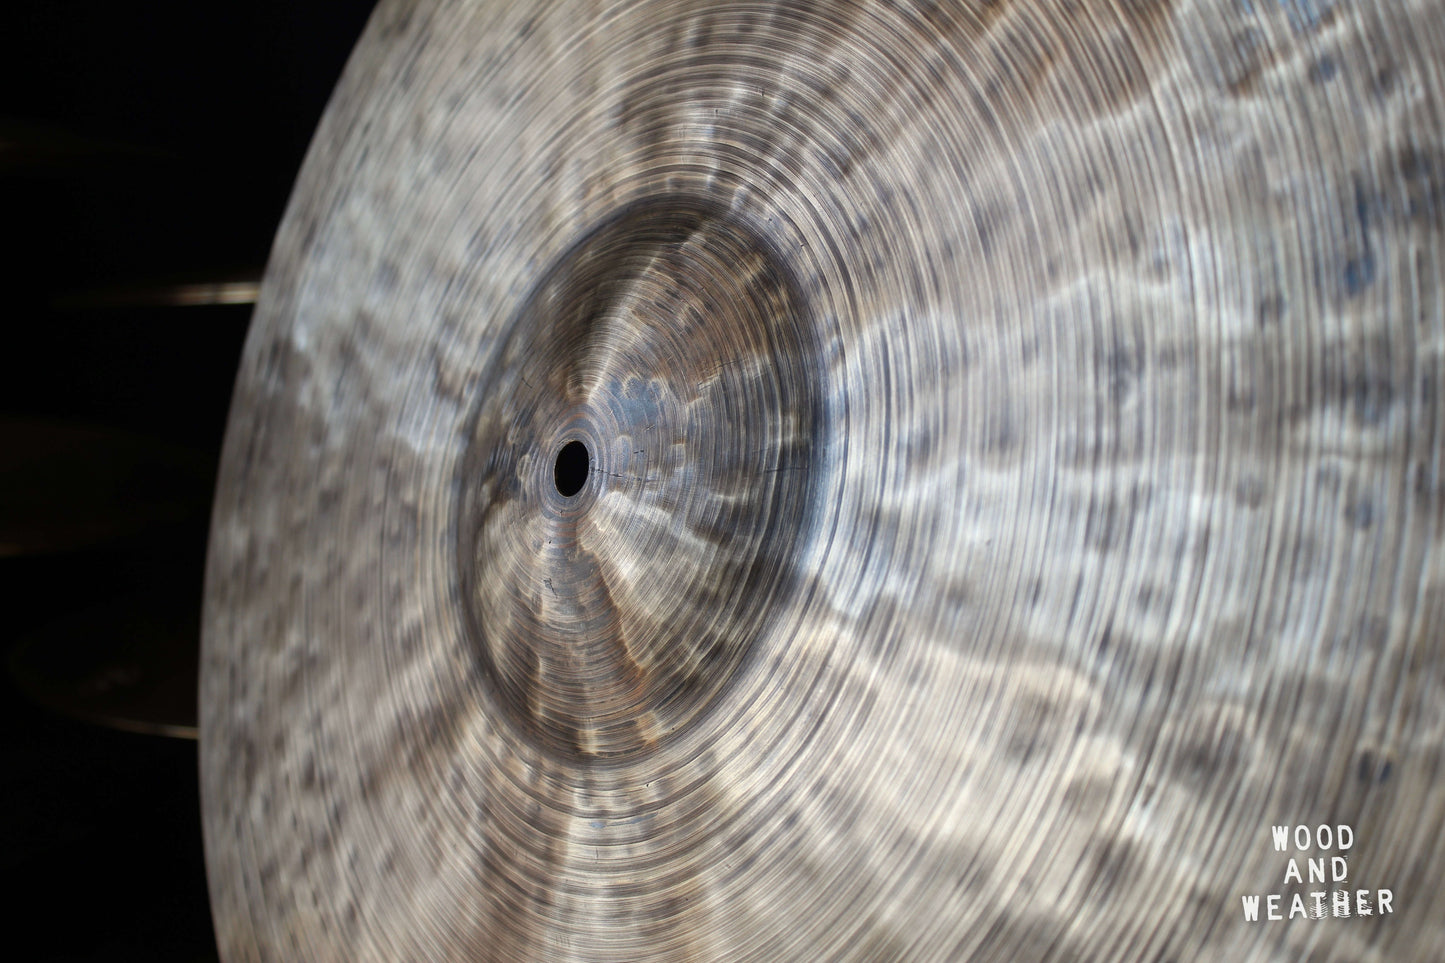 Istanbul Agop 19" 30th Anniversary Ride Cymbal 1359g